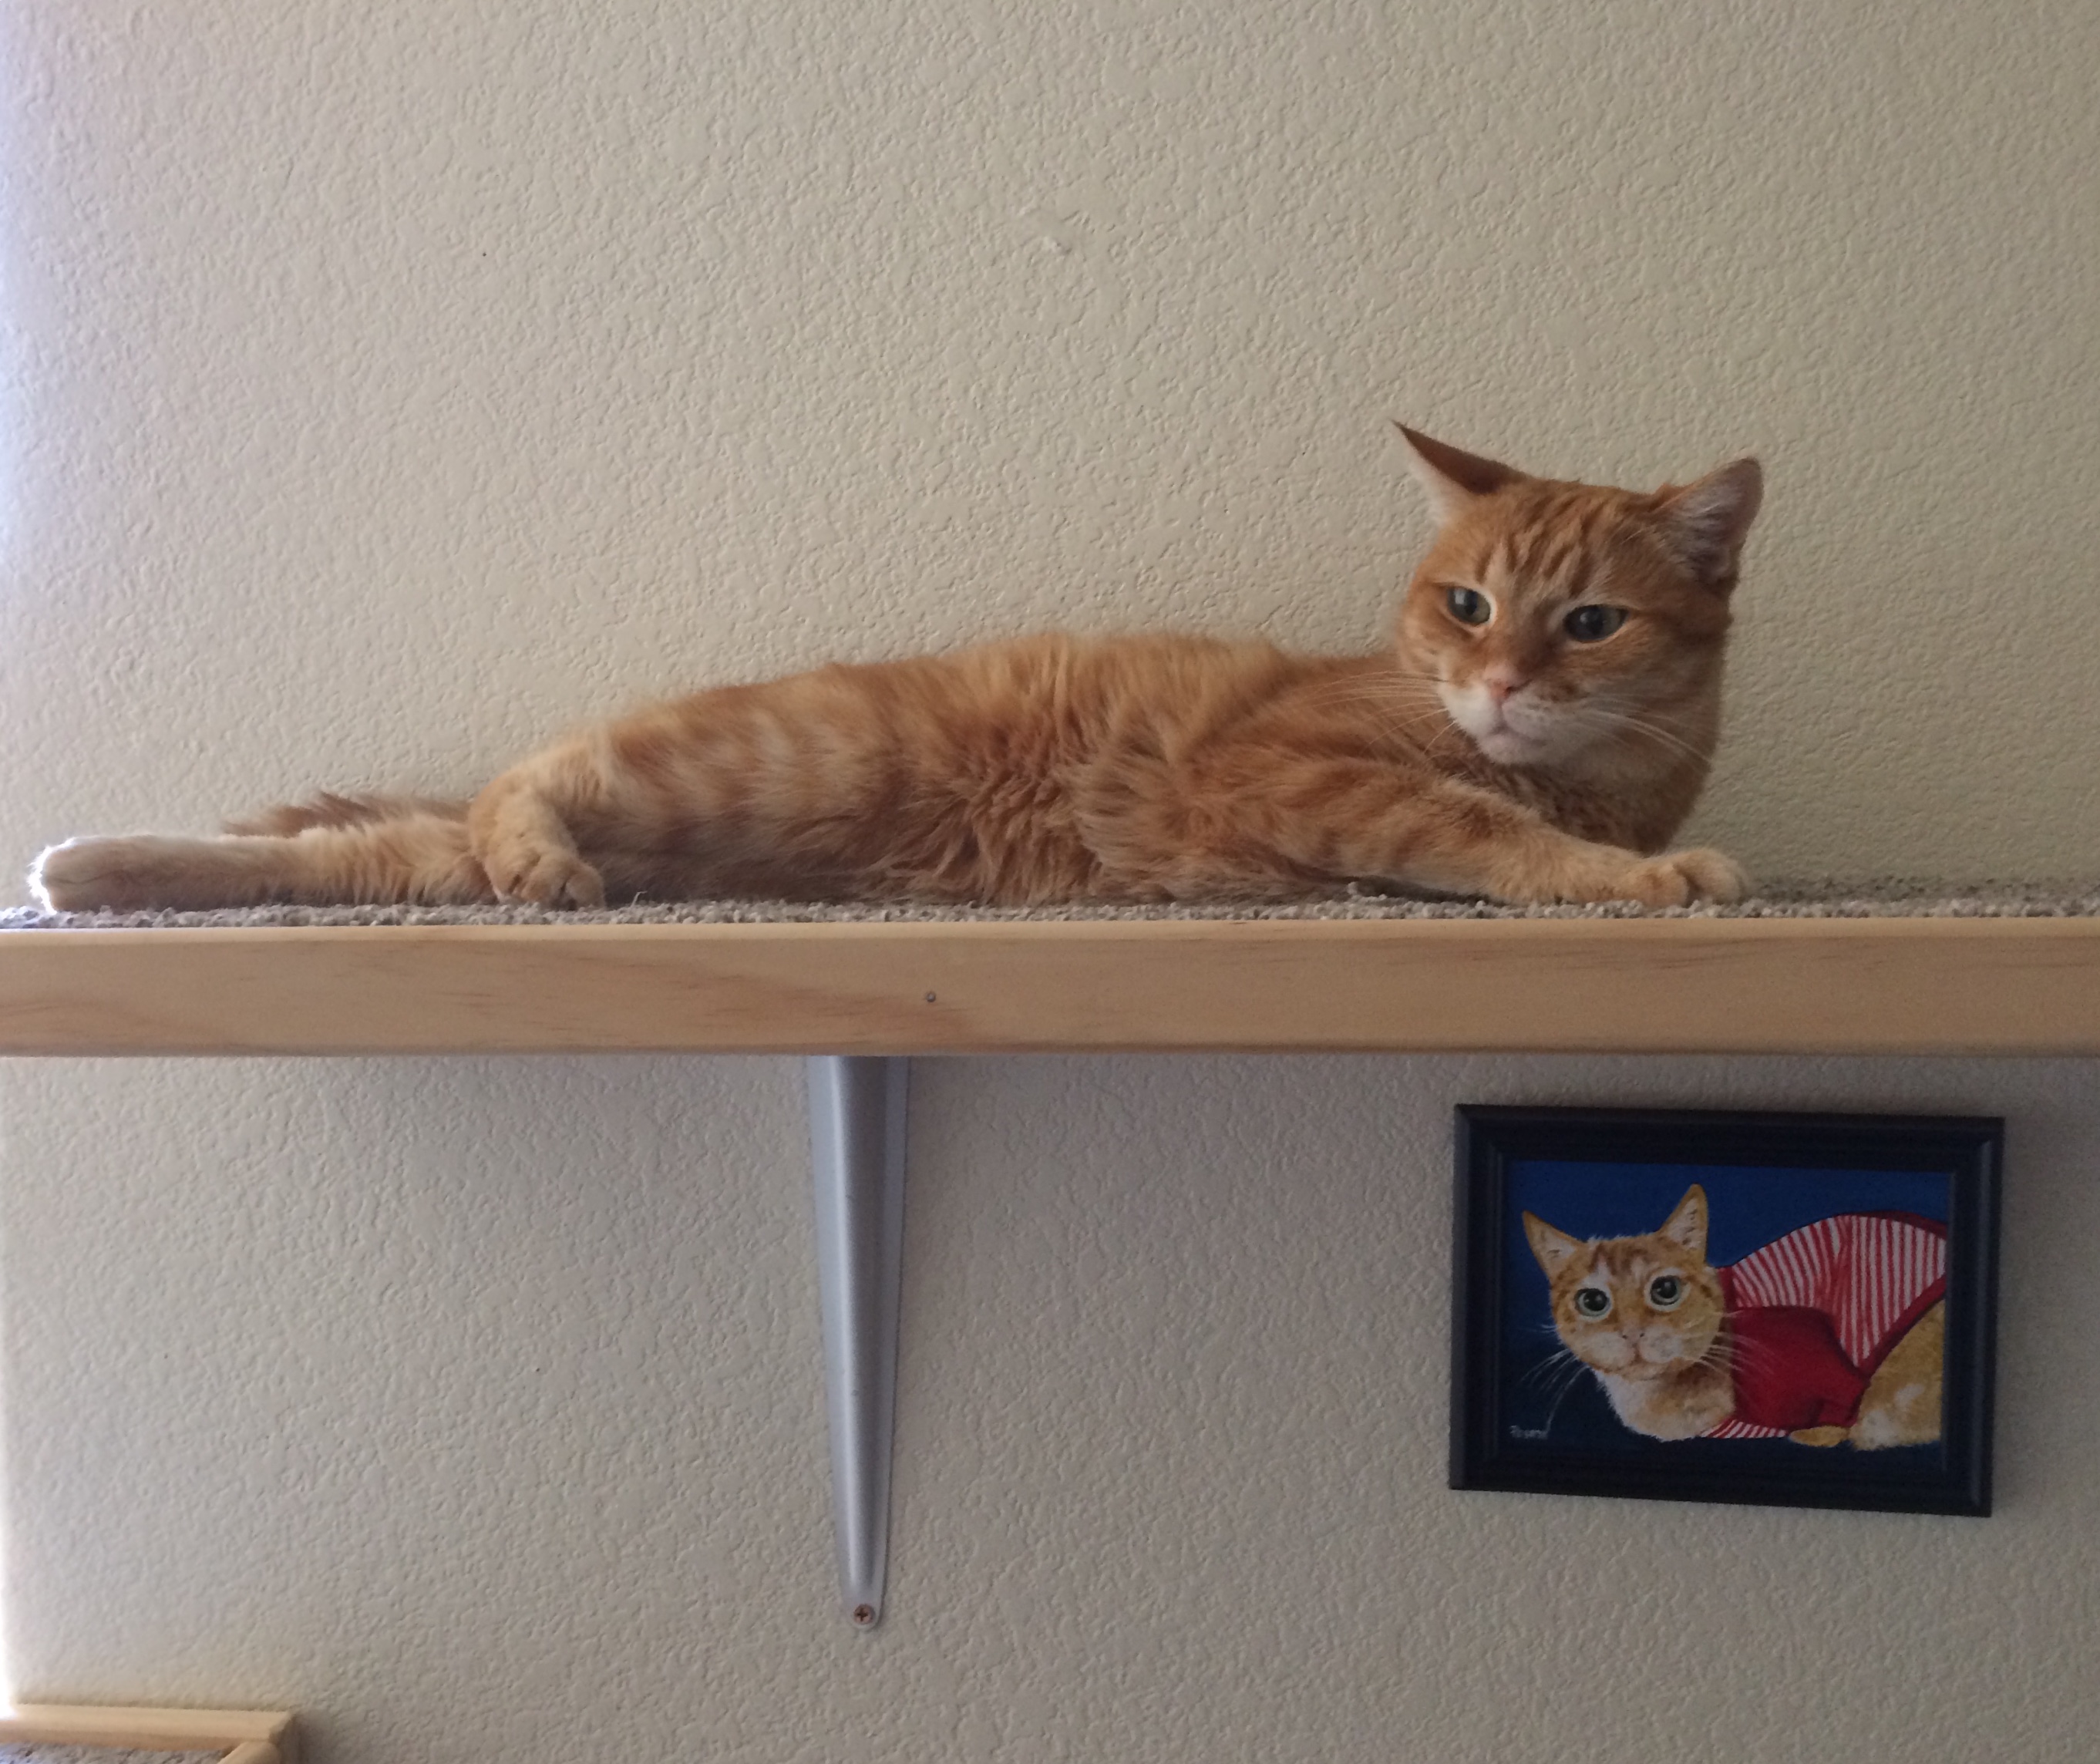 An orange tabby lounging on a carpeted cat shelf. A painting of the same tabby is visible on the wall beneath the shelf.